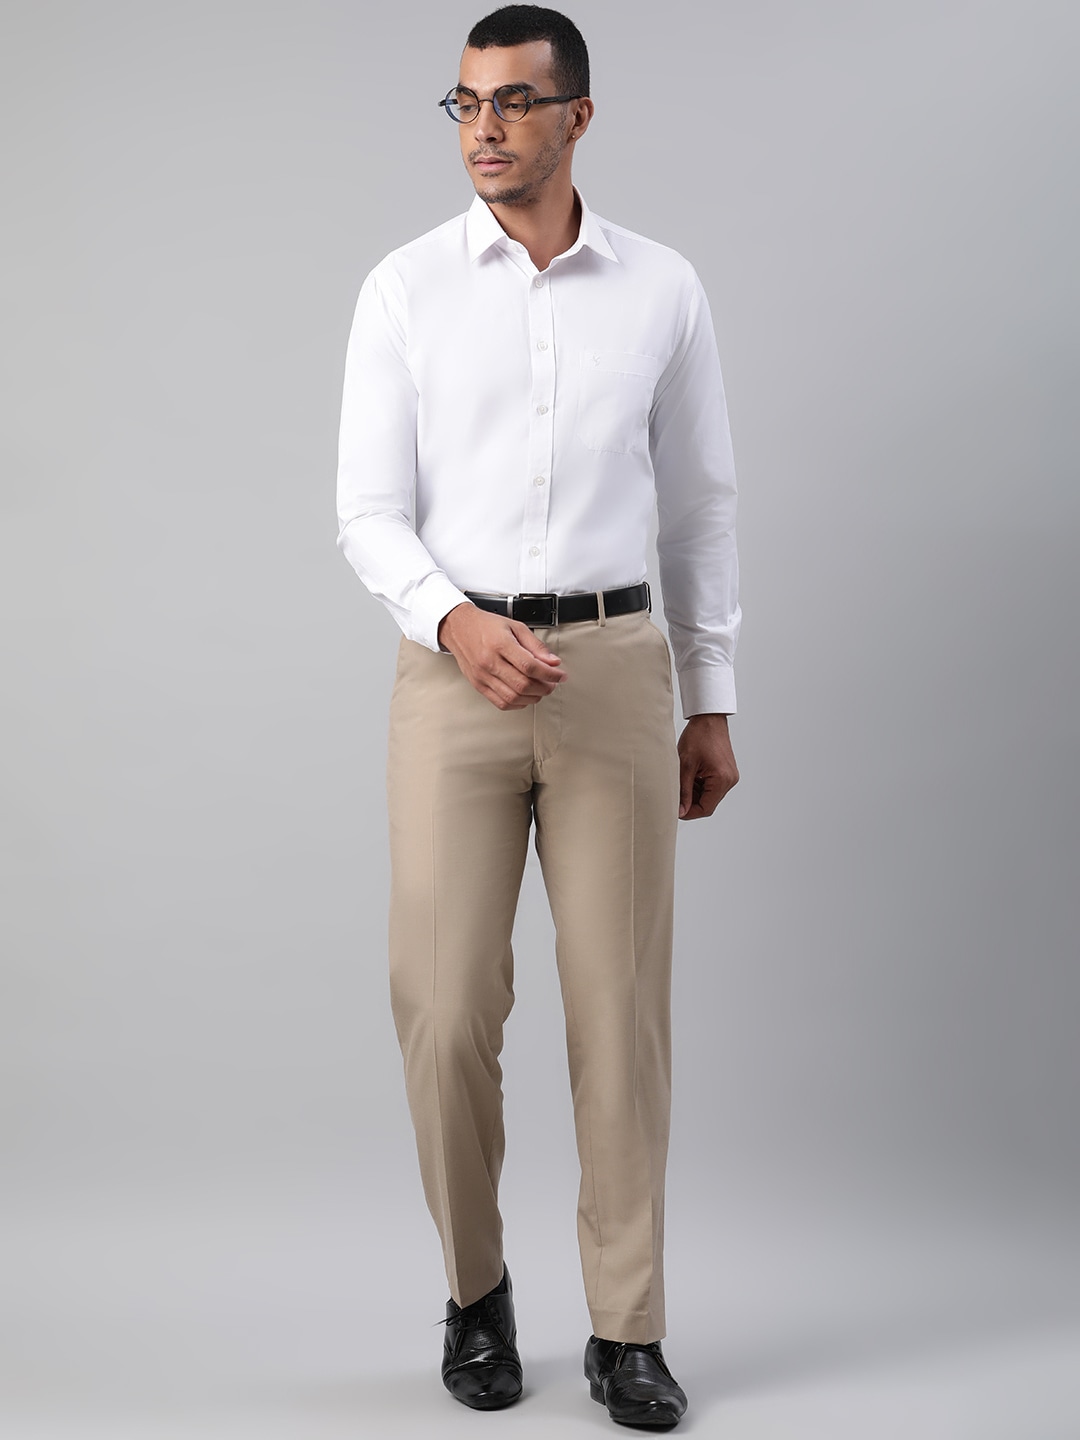 White Shirt Combination Formal Pant | Suitable Pant For White Shirt ...